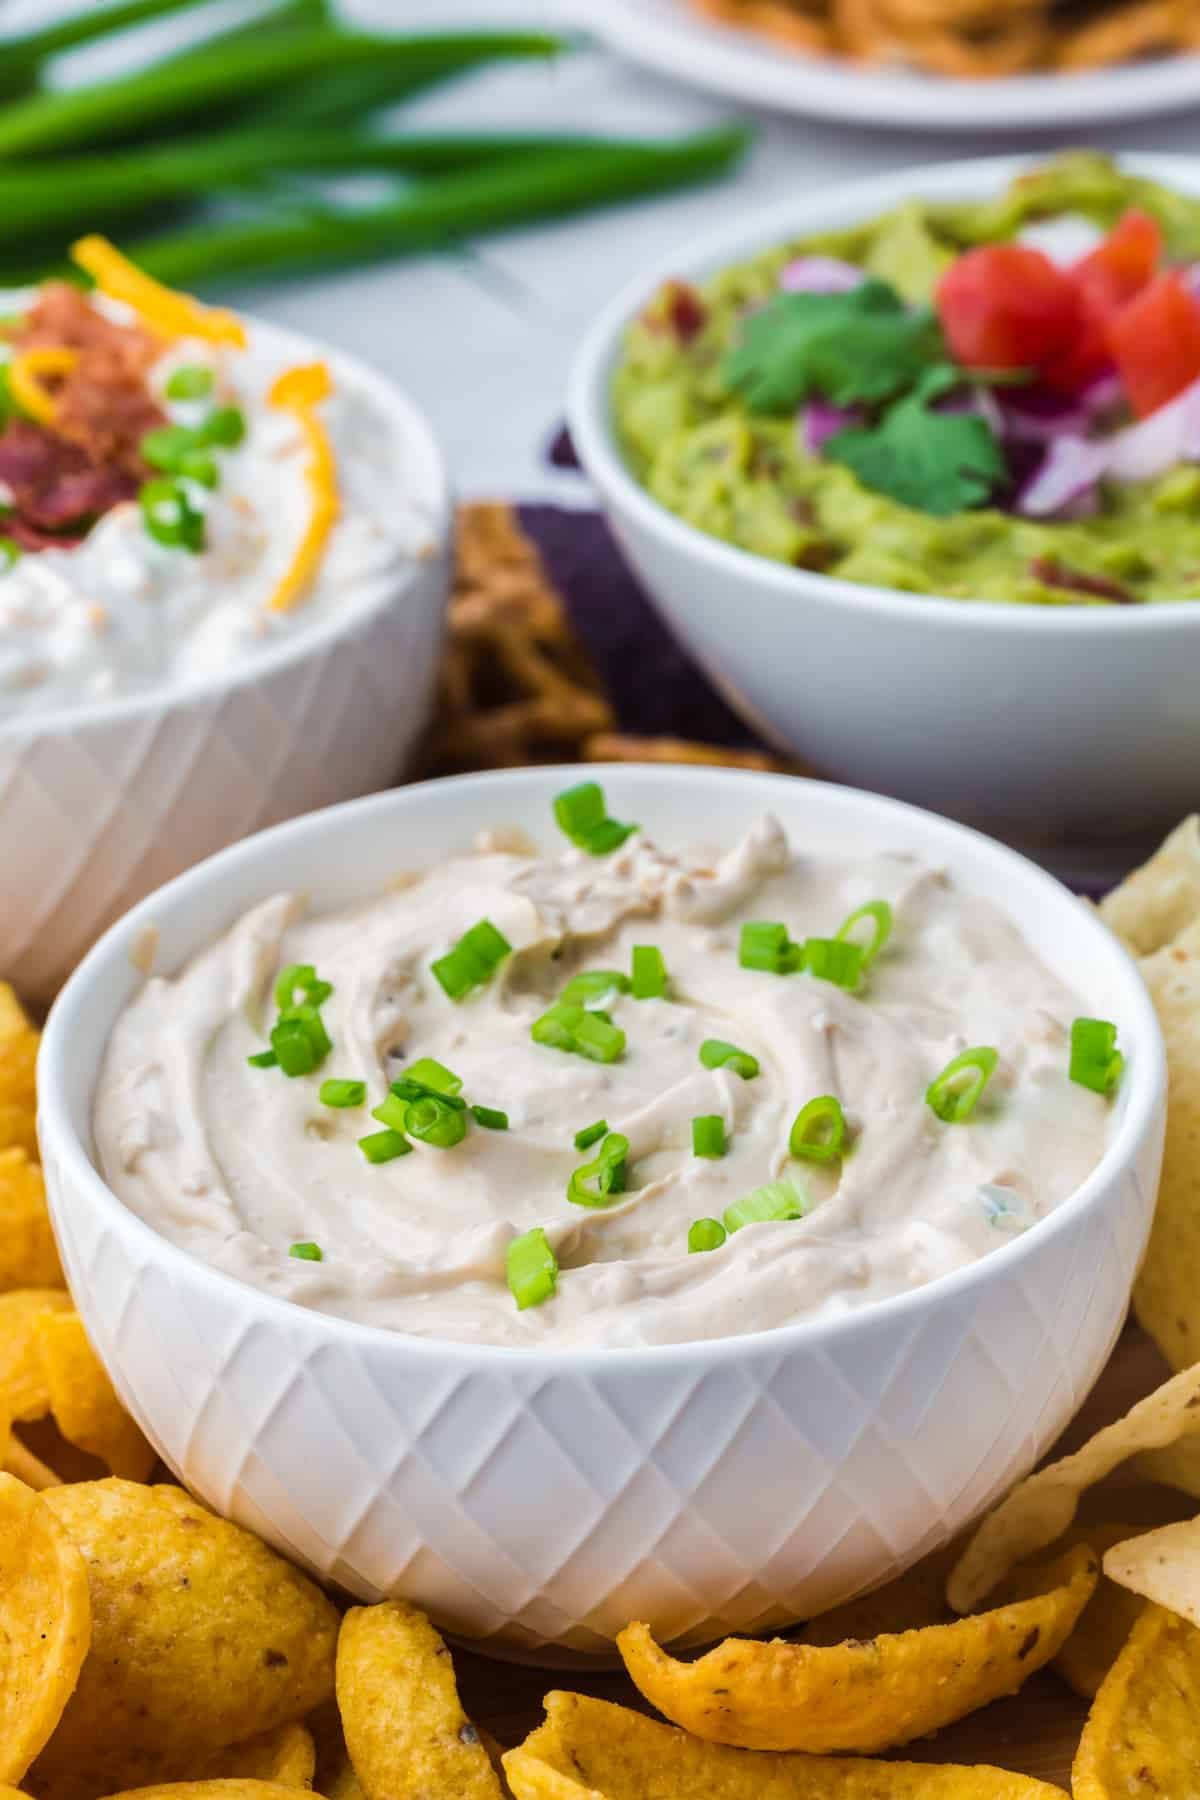 A small bowl of french onion dip garnished with green onions.